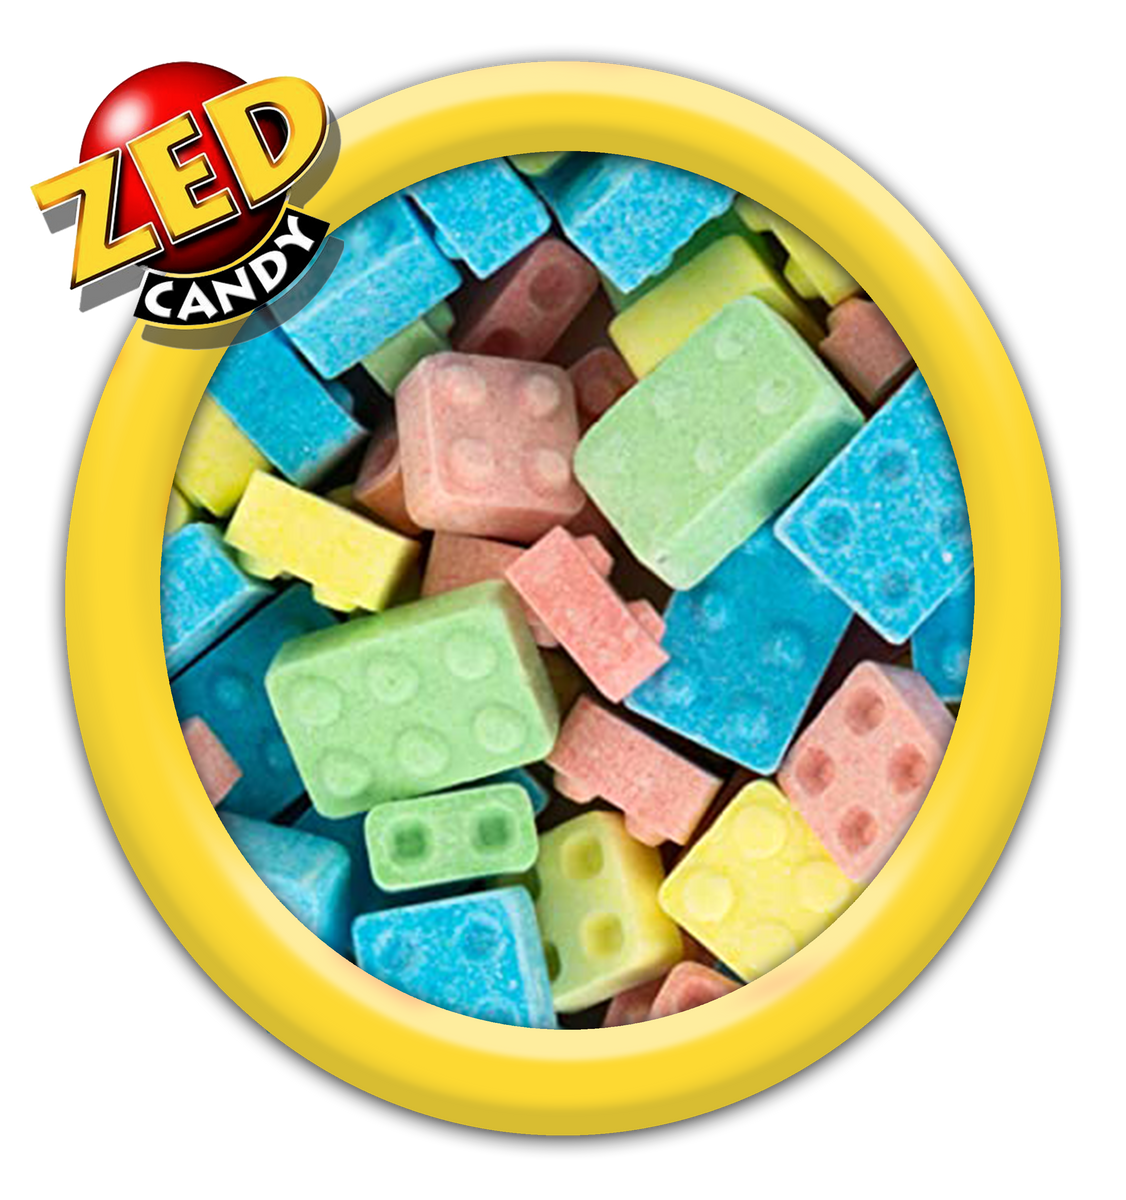 zed candy